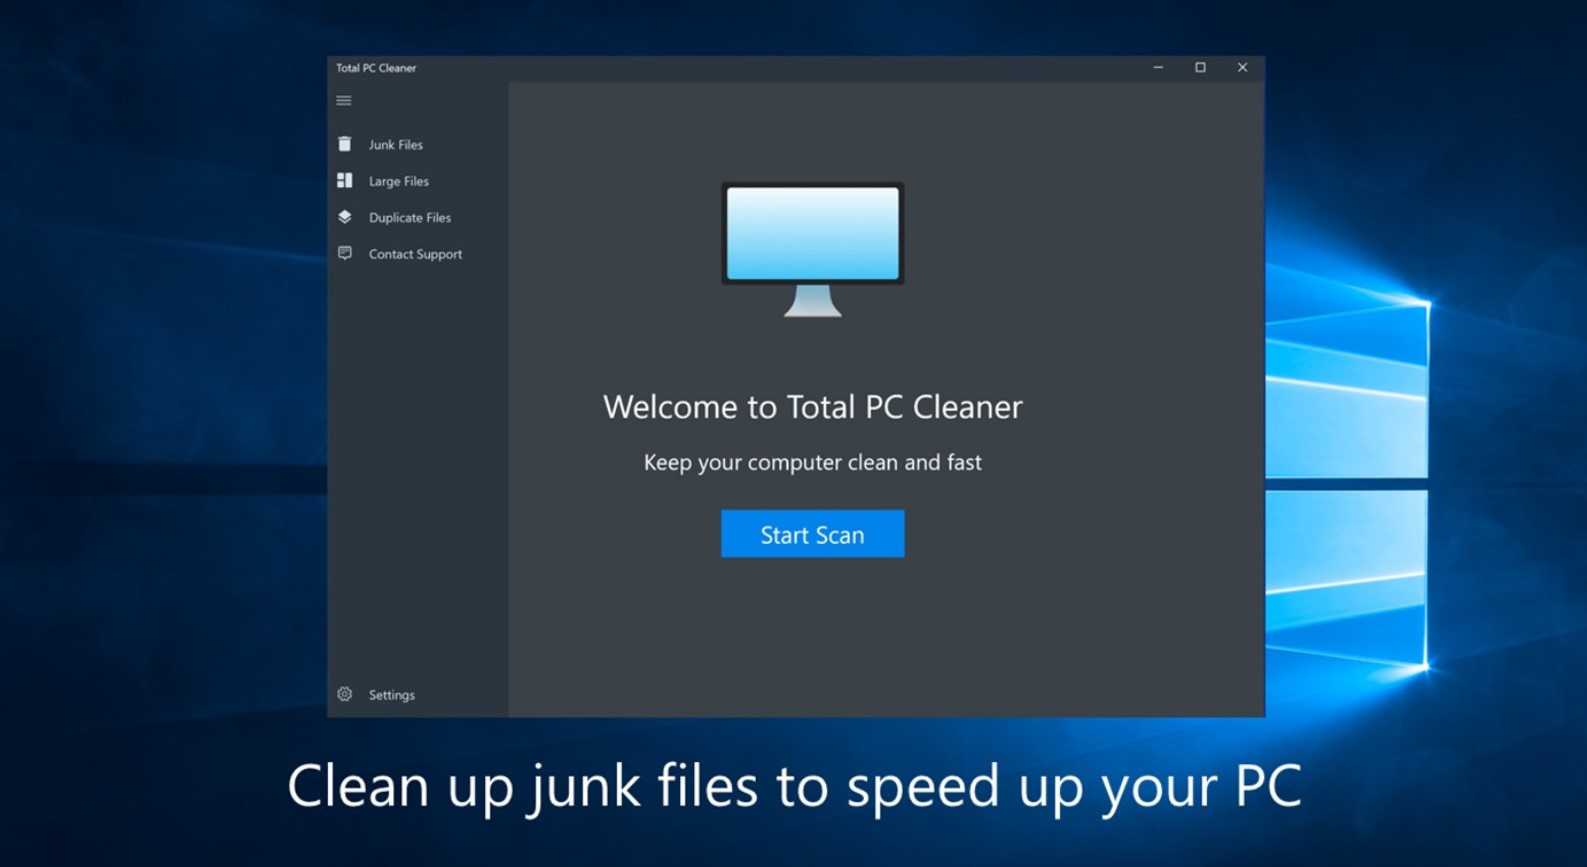 Clean на пк. PC Cleaner. Windows Cleaner. Clean PC. Cleaner my PC.